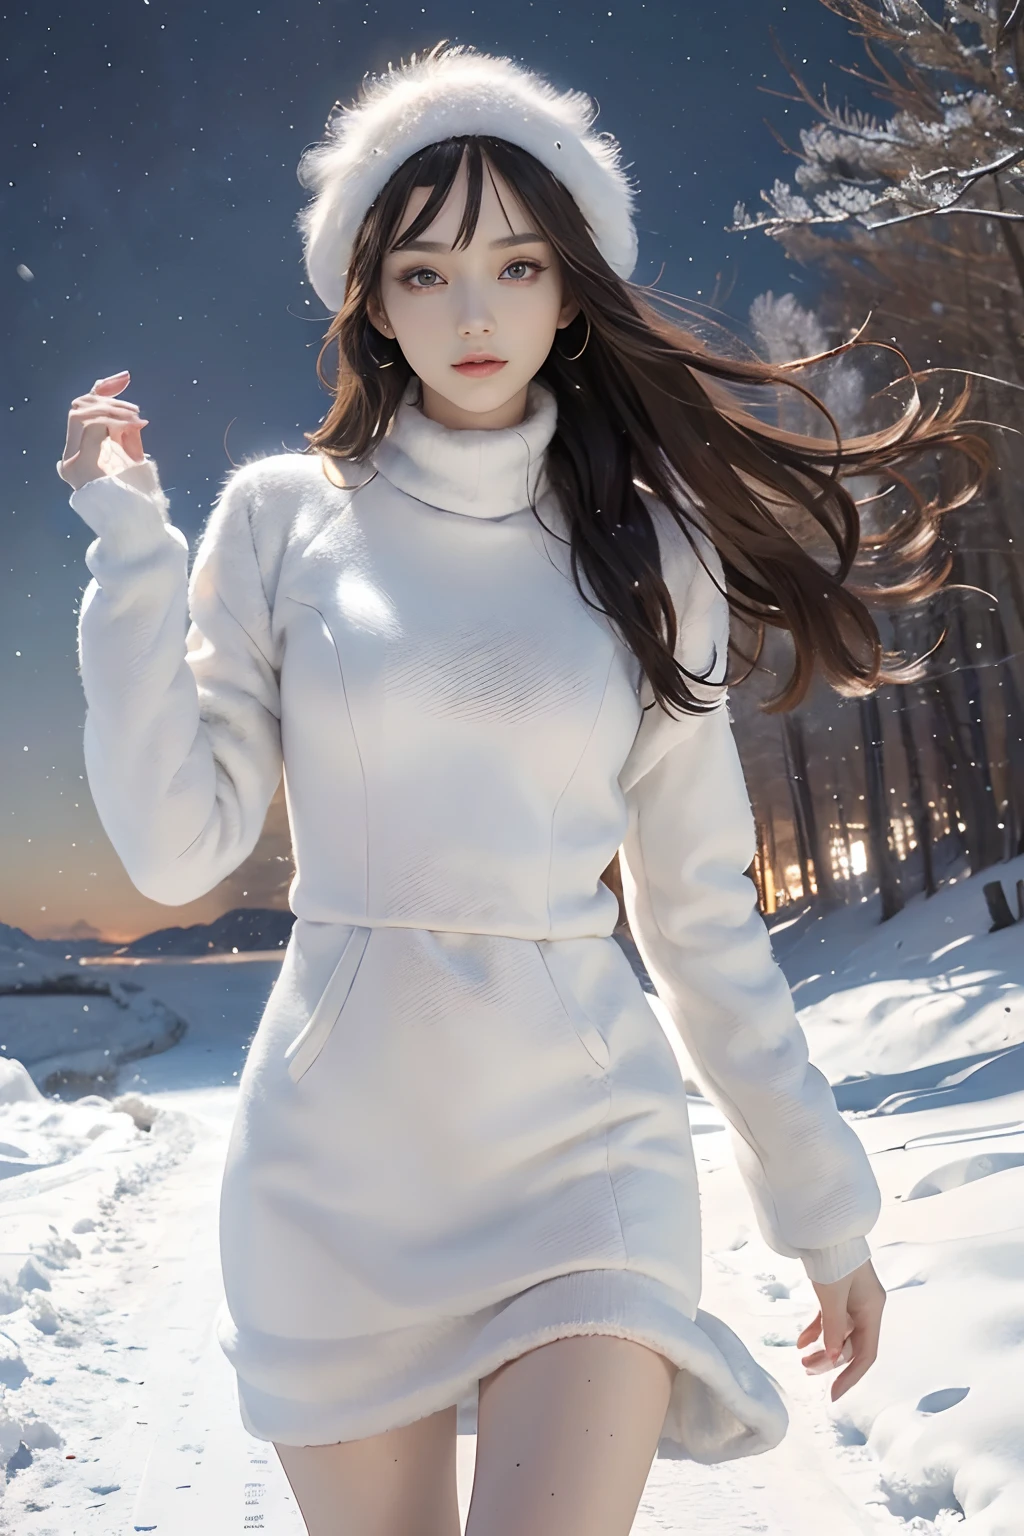 Breathtaking 8K, Masterpiece, (Fine face:1.8), (View:1.2),Beautiful woman, Slender and beautiful girl, Ice crystals， (Winter dresses), full bodyesbian, ((Winters)),Rich background，Snow and ice wind，Snowflakes fluttering，